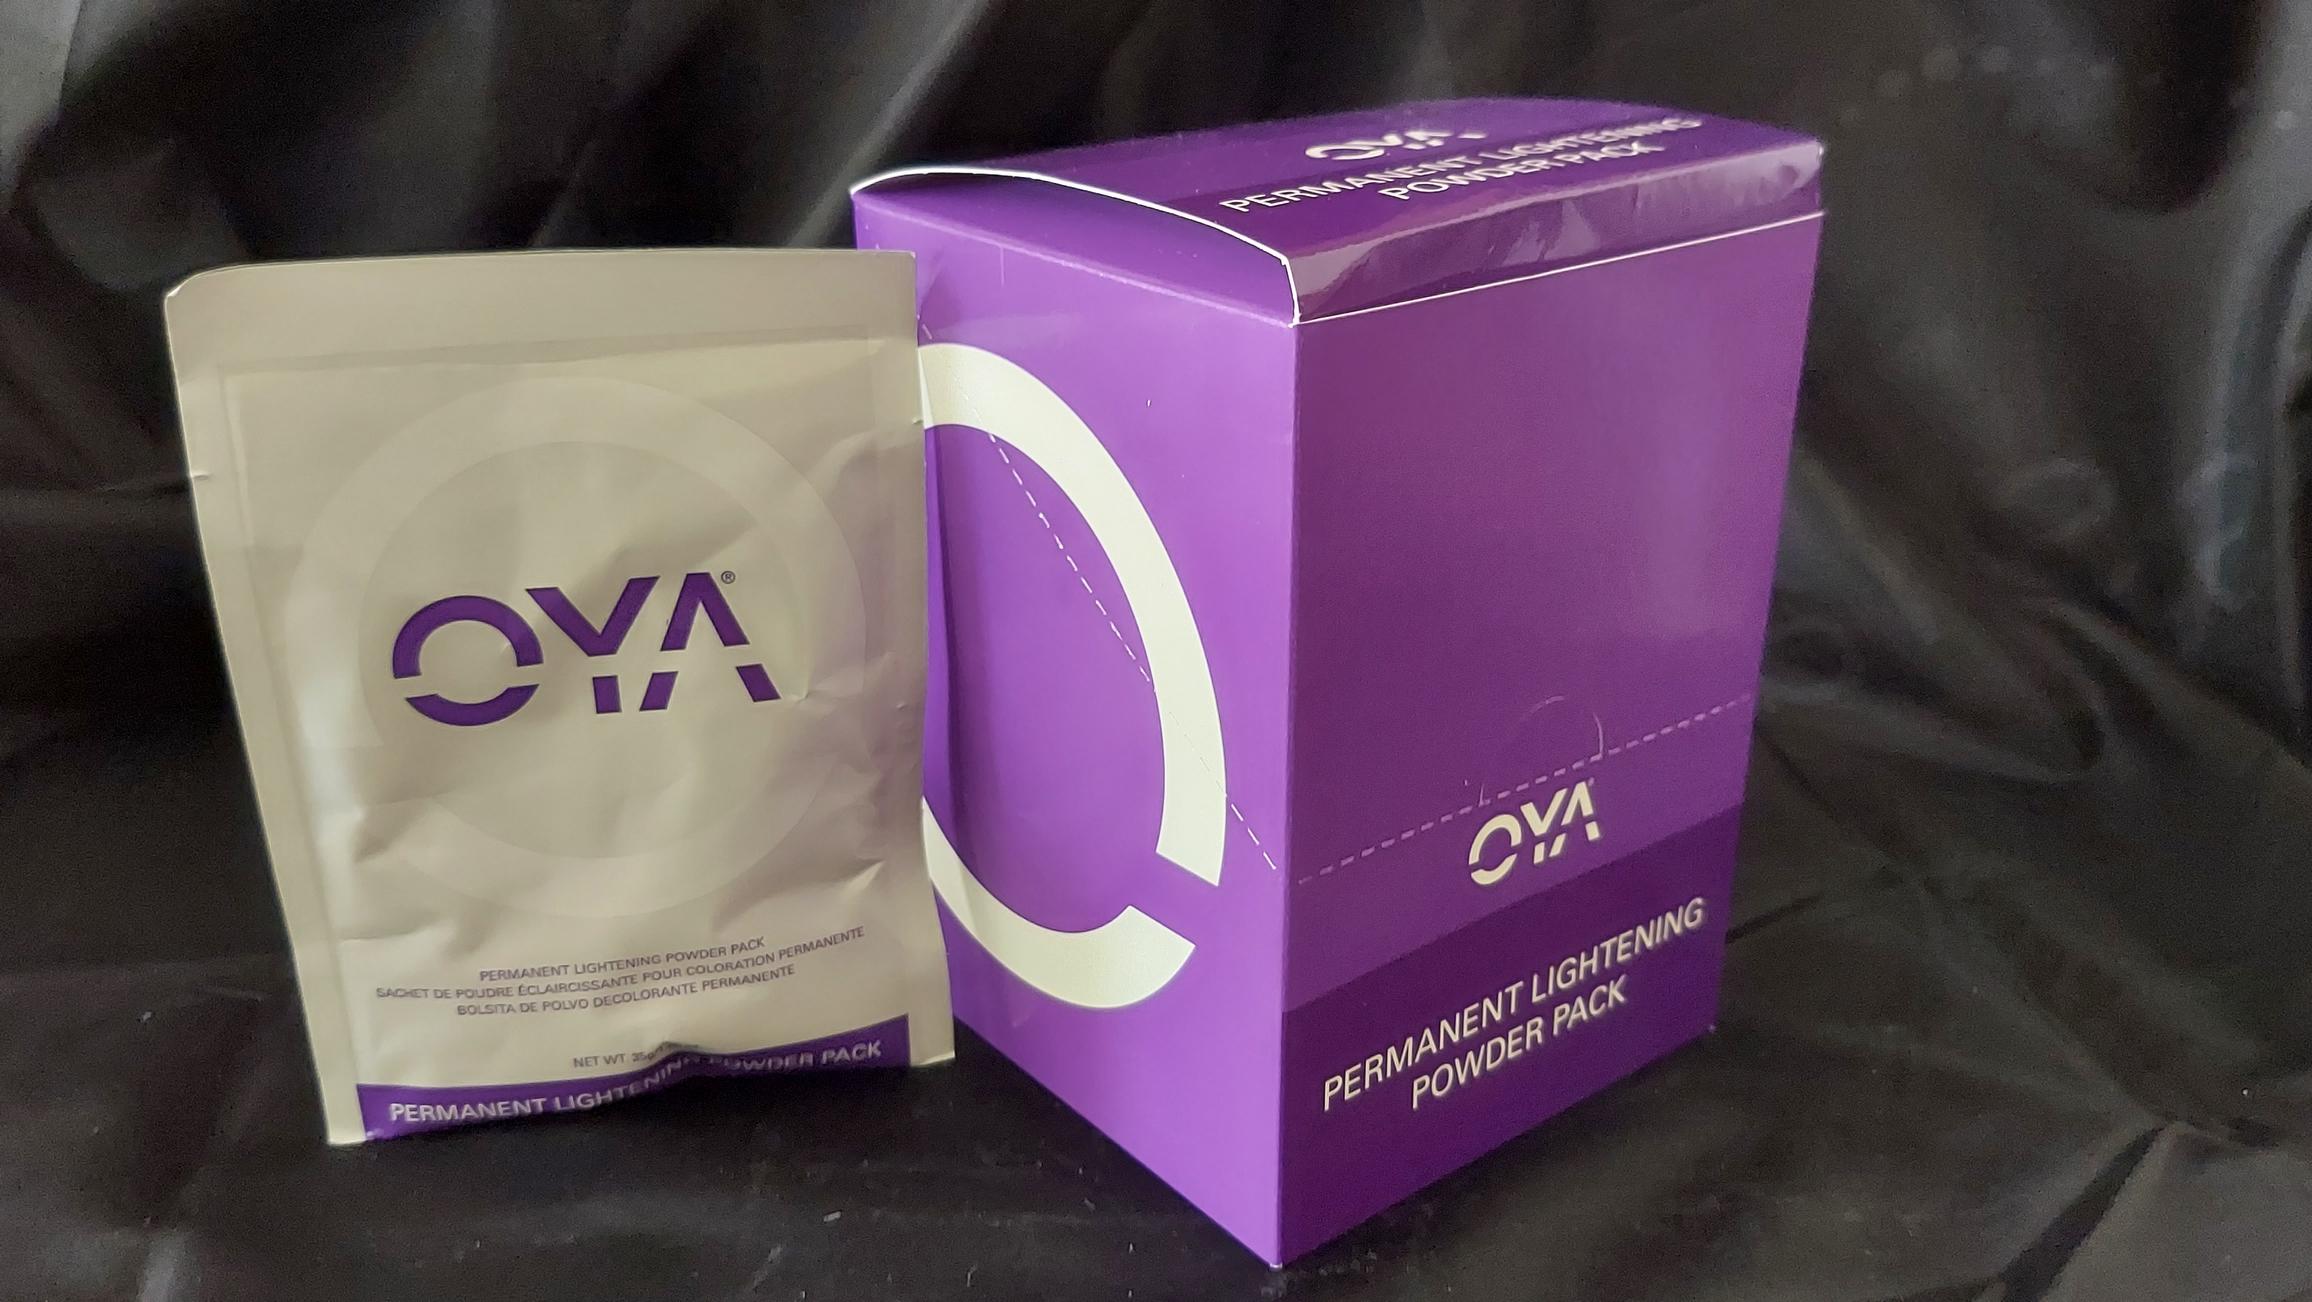 (20) Cases Of OYA Permanent Lightening Powder Pack - Over 180 Units